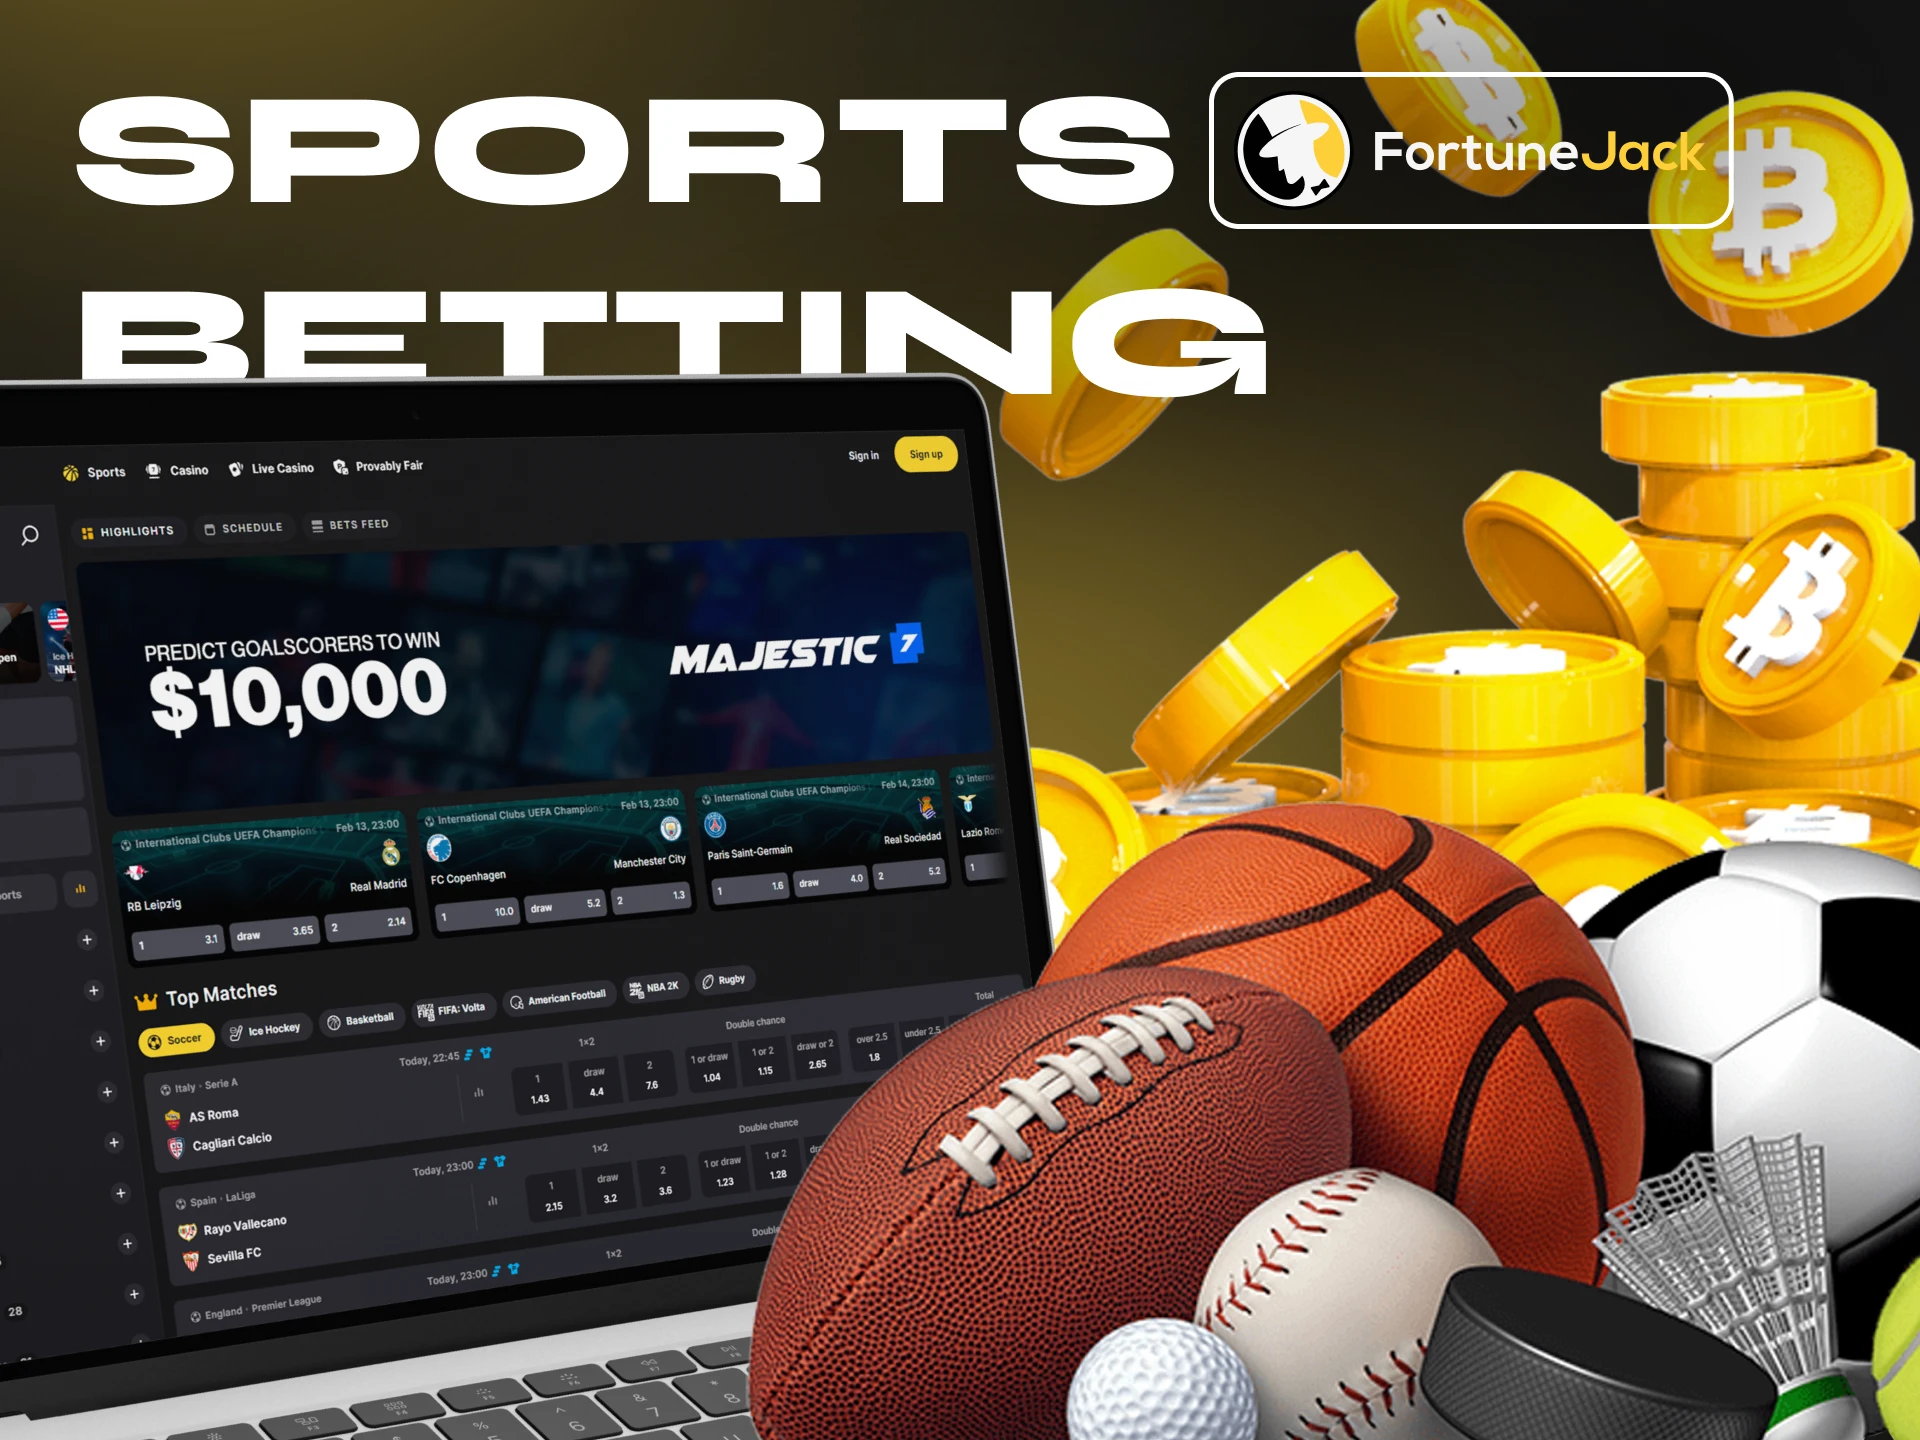 At FortuneJack Casino you can bet on various sporting events.